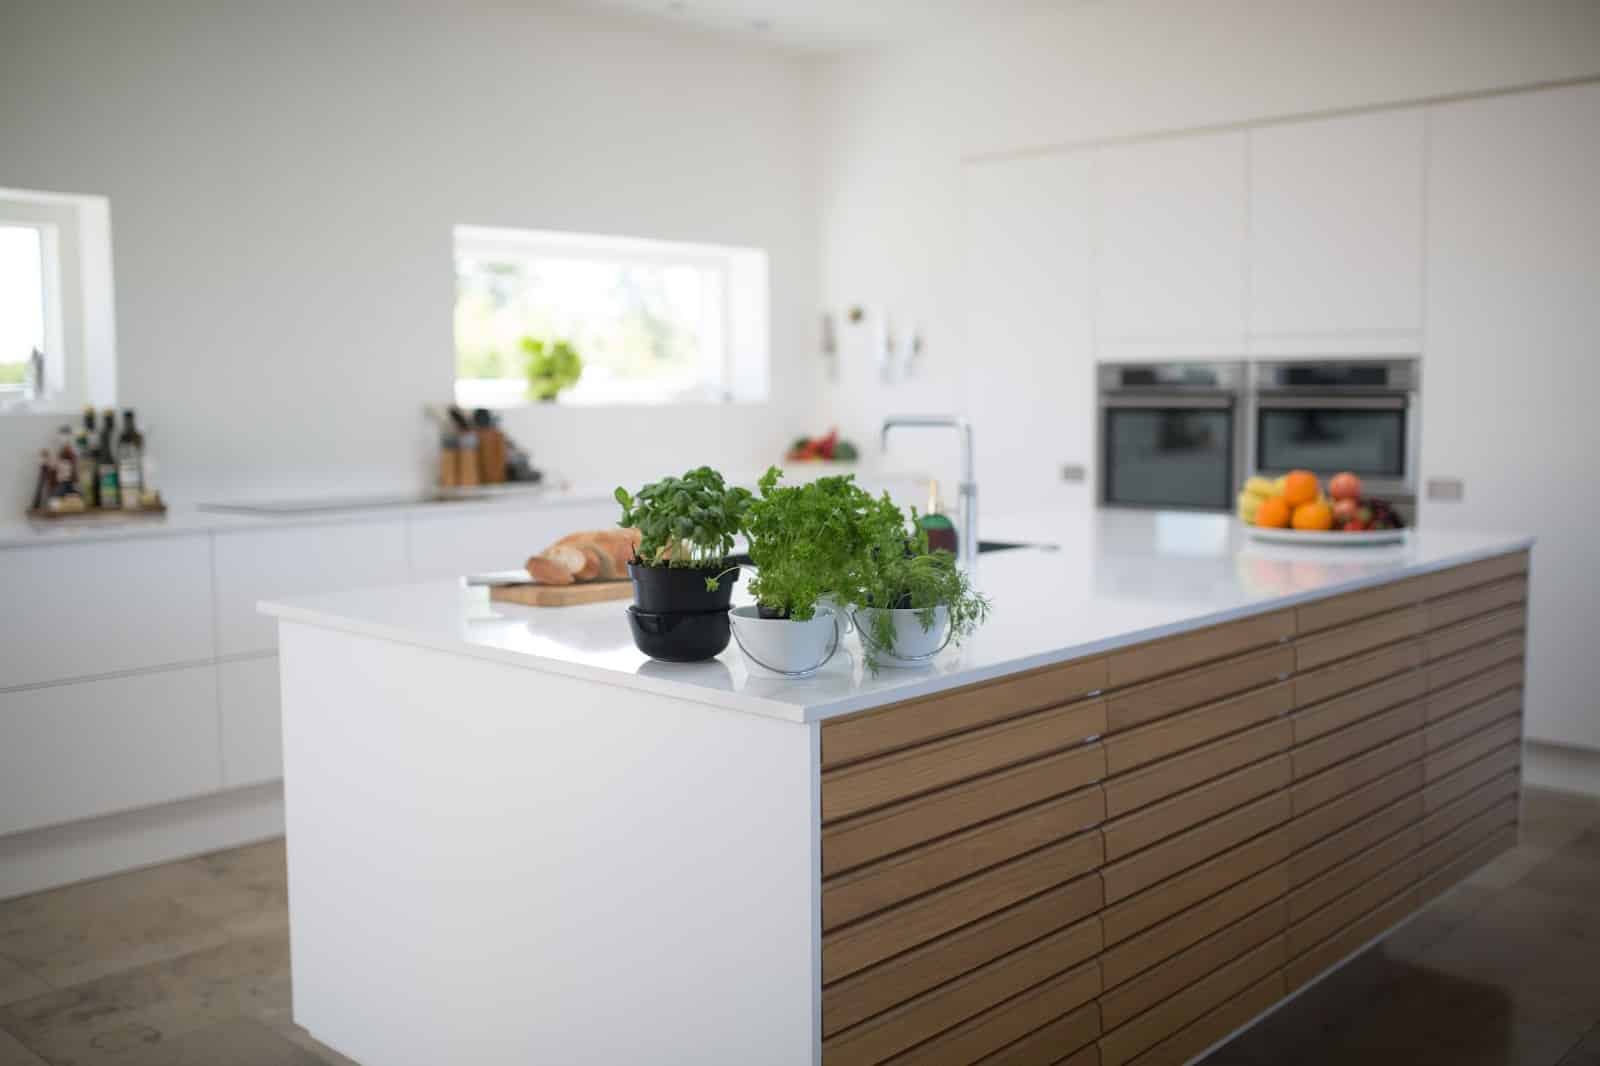 What Does a Kitchen Remodel Mean?